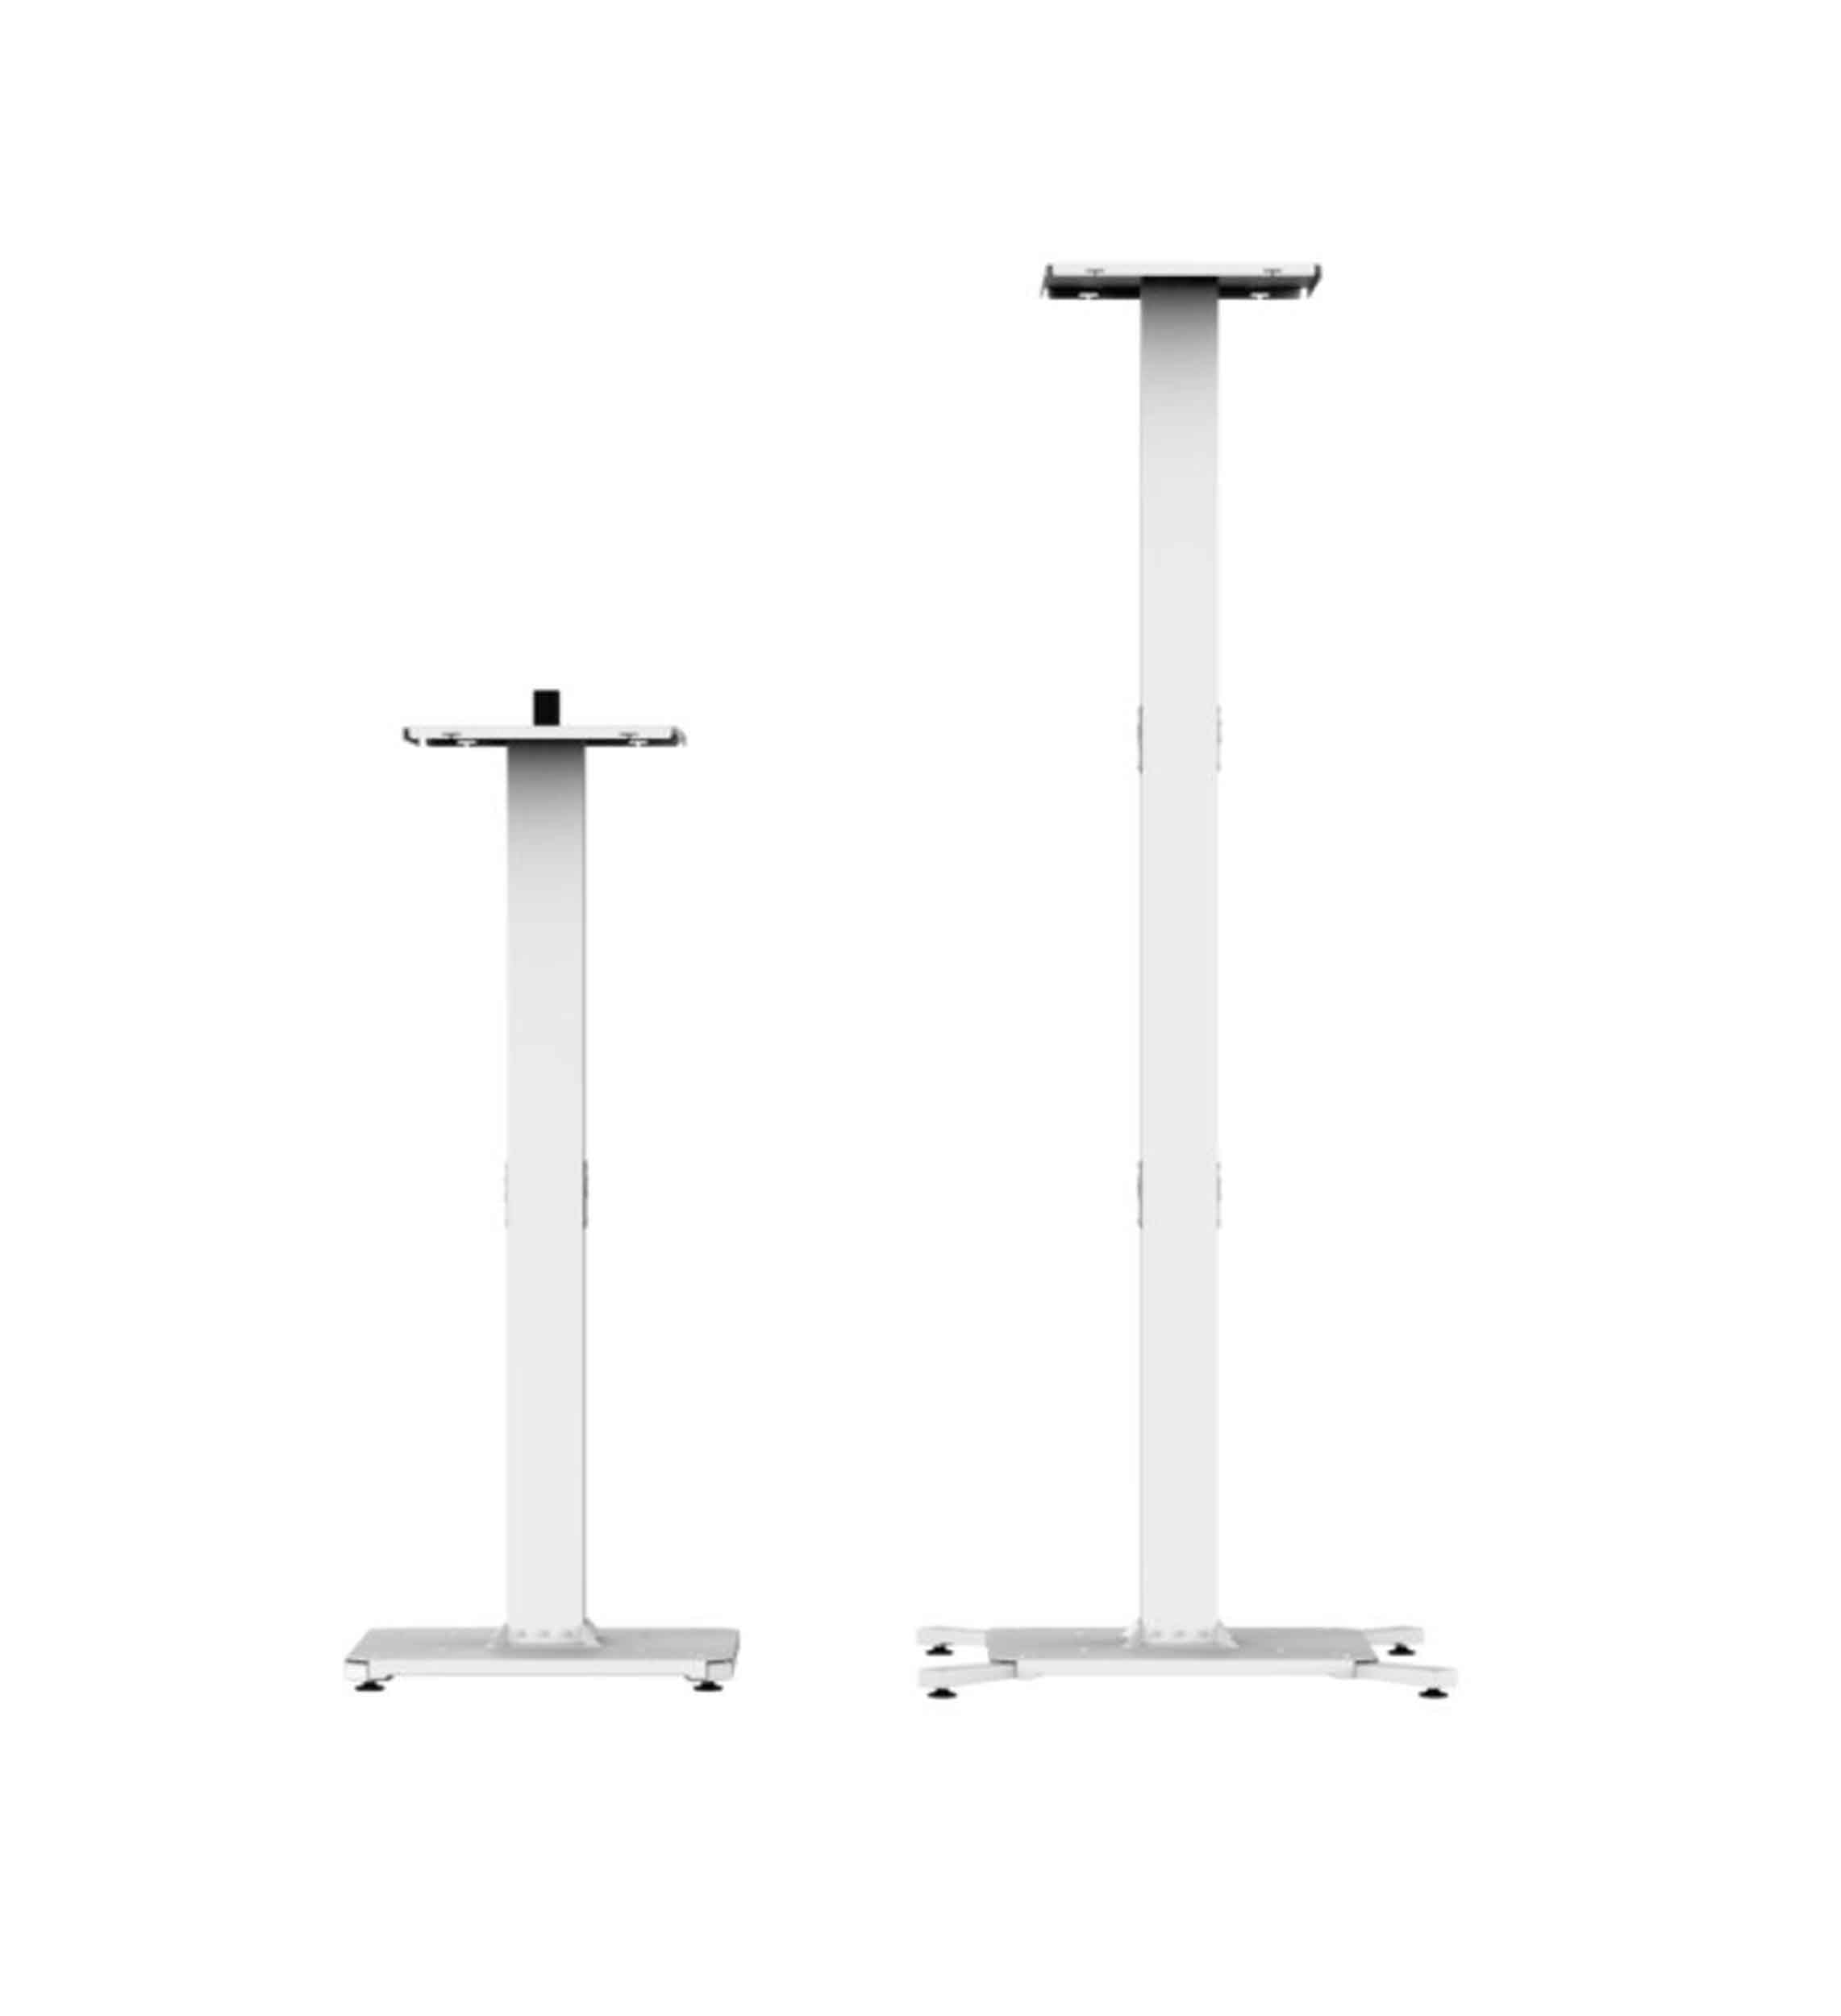 B-Stock: ProX XFH-MHSTANDX2WH Humpter Adjustable Lighting and DJ Stands with Carrying Bags - Pair of White by ProX Cases